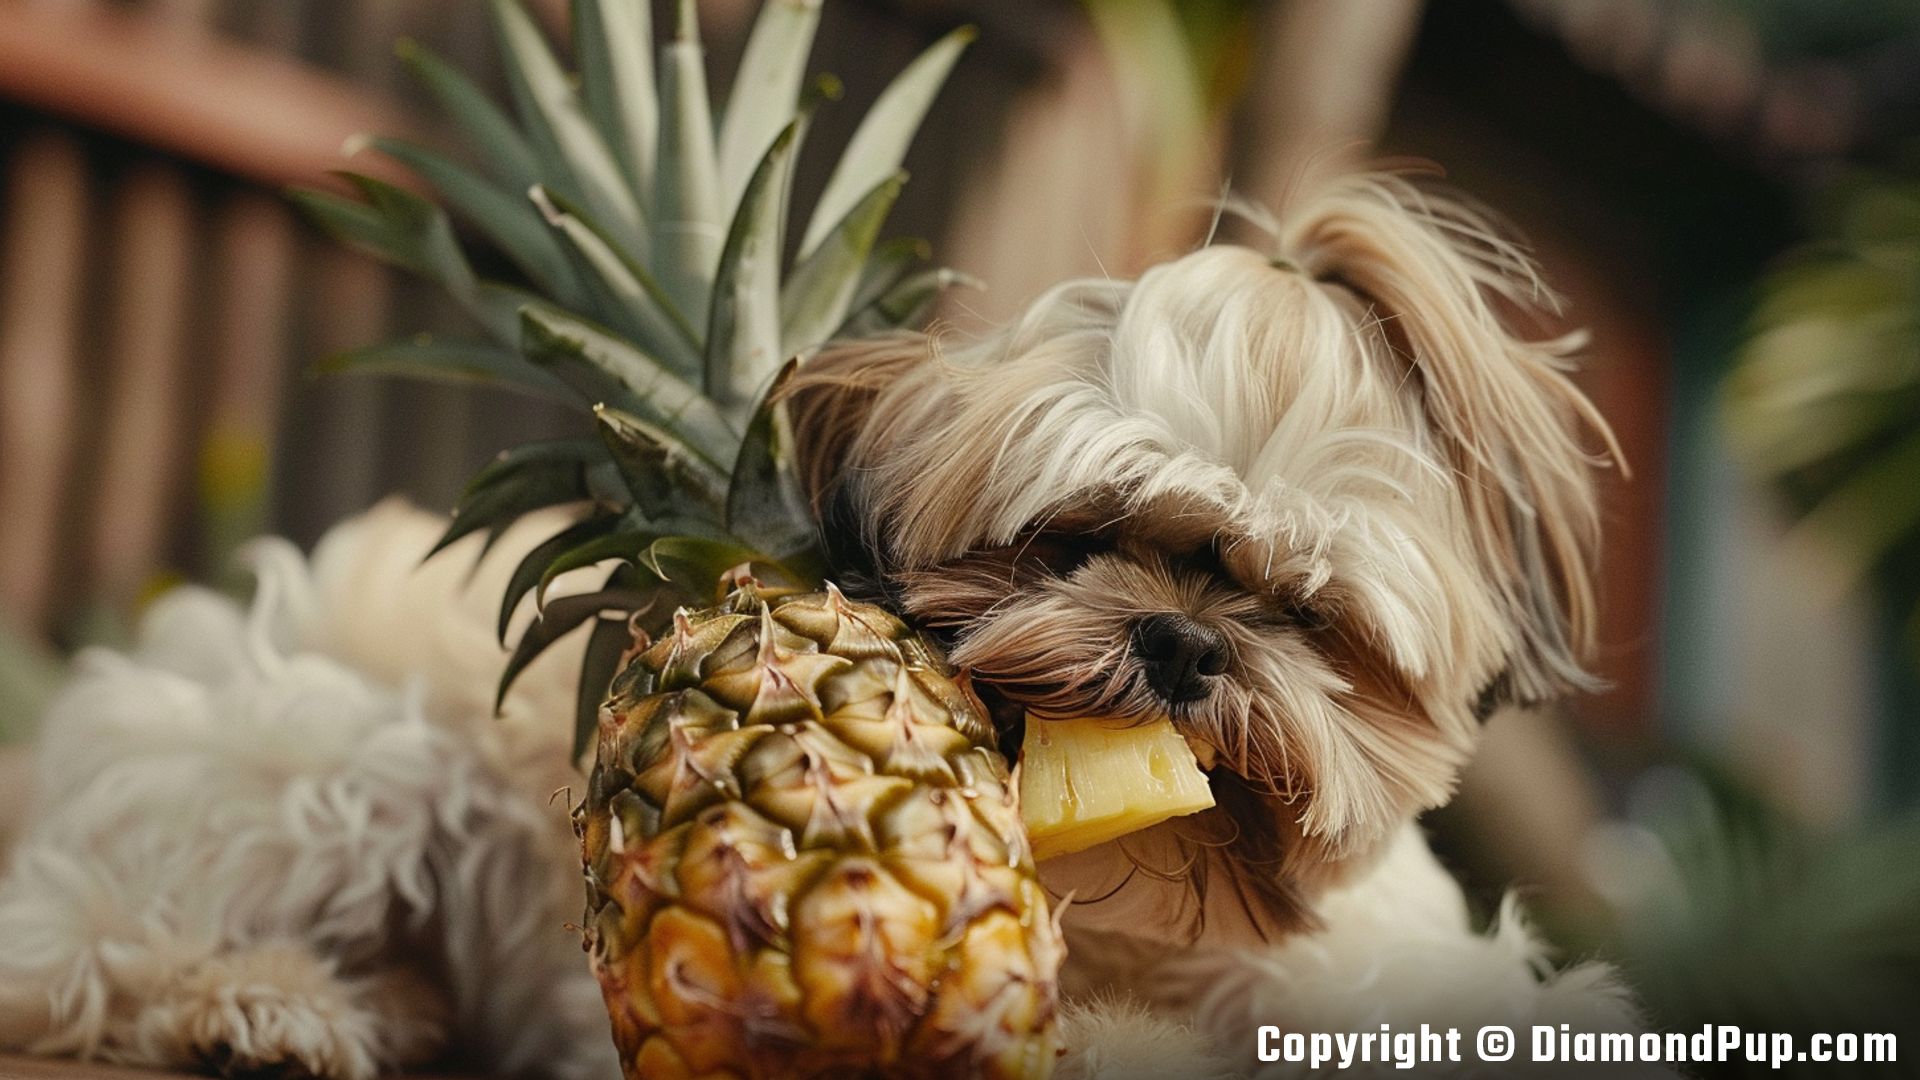 Image of a Happy Shih Tzu Eating Pineapple